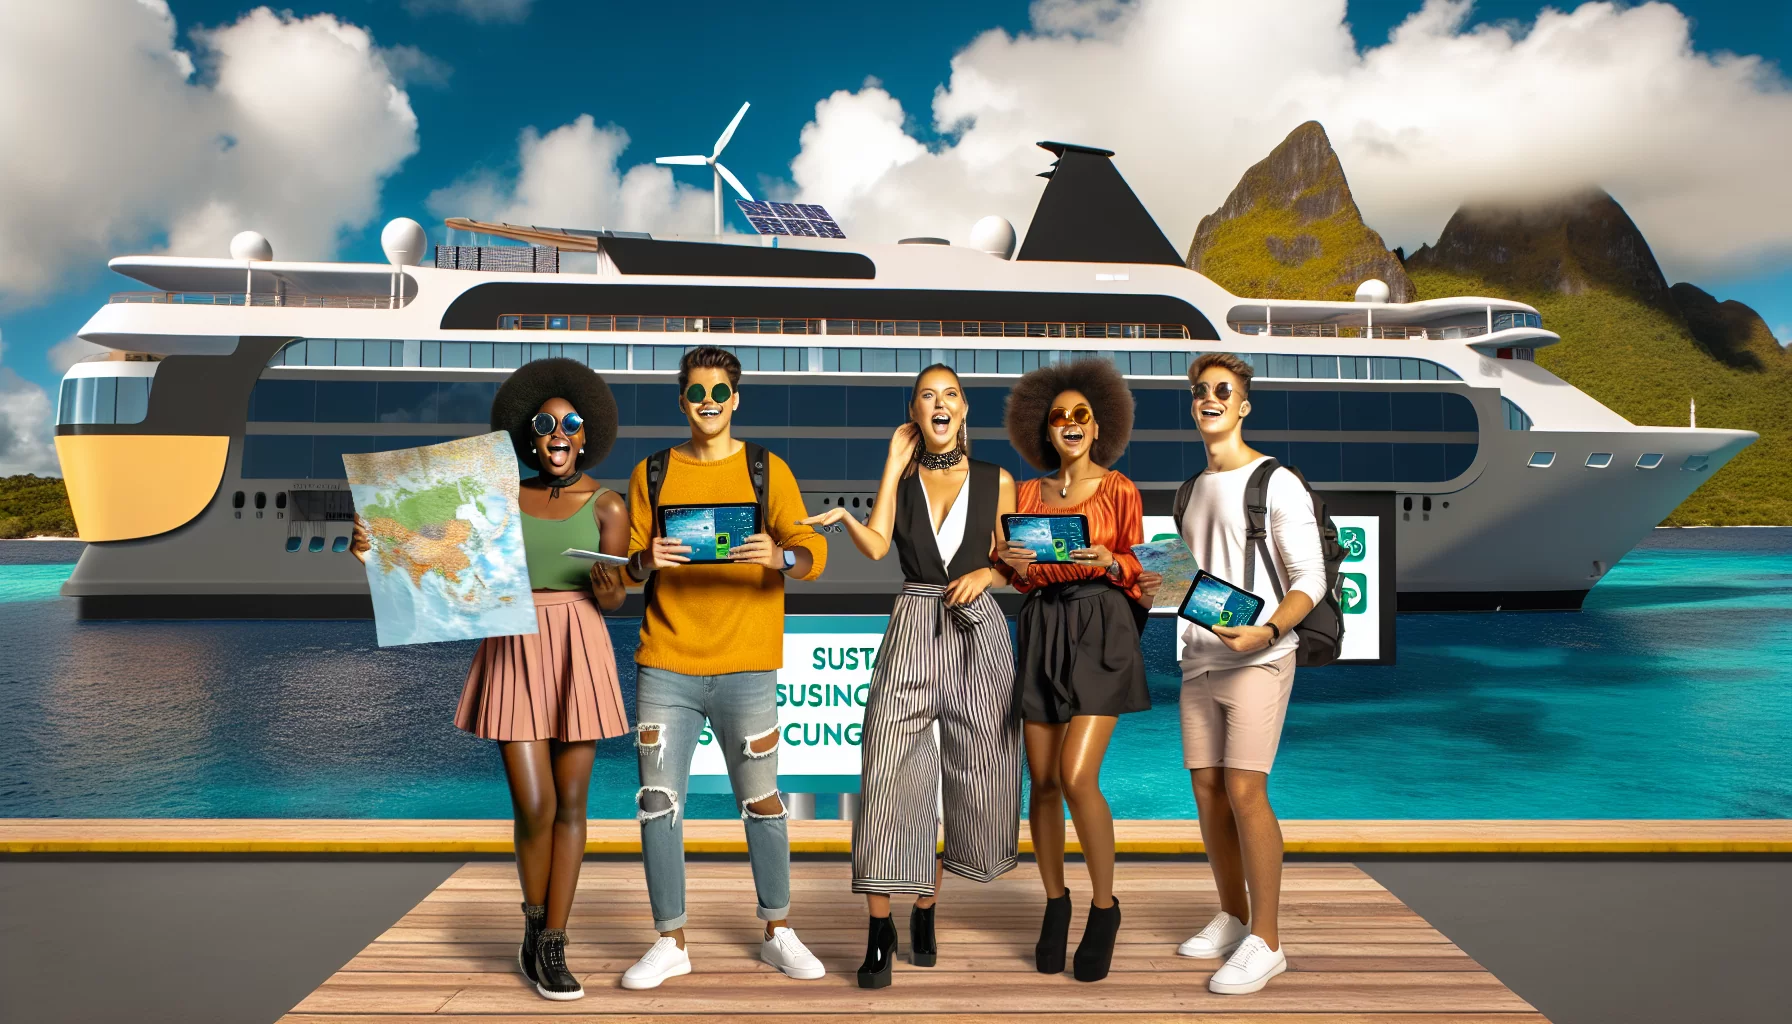 Cruise vacations are the new trend in Gen Z travel fueled by adventure, sustainability, and technology